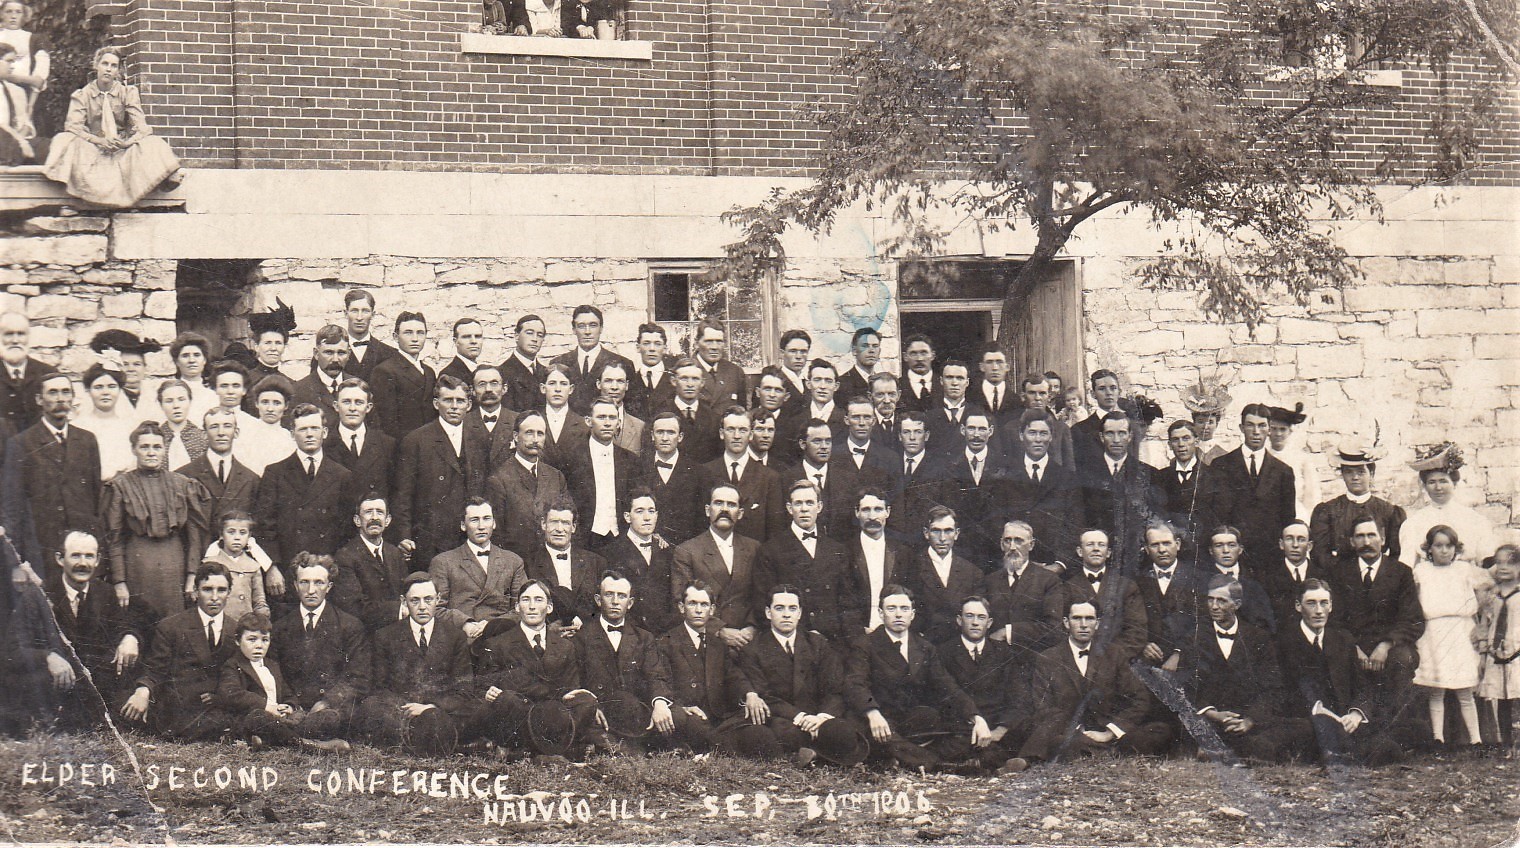 Elders at the 2nd conference at Nauvoo,  1906